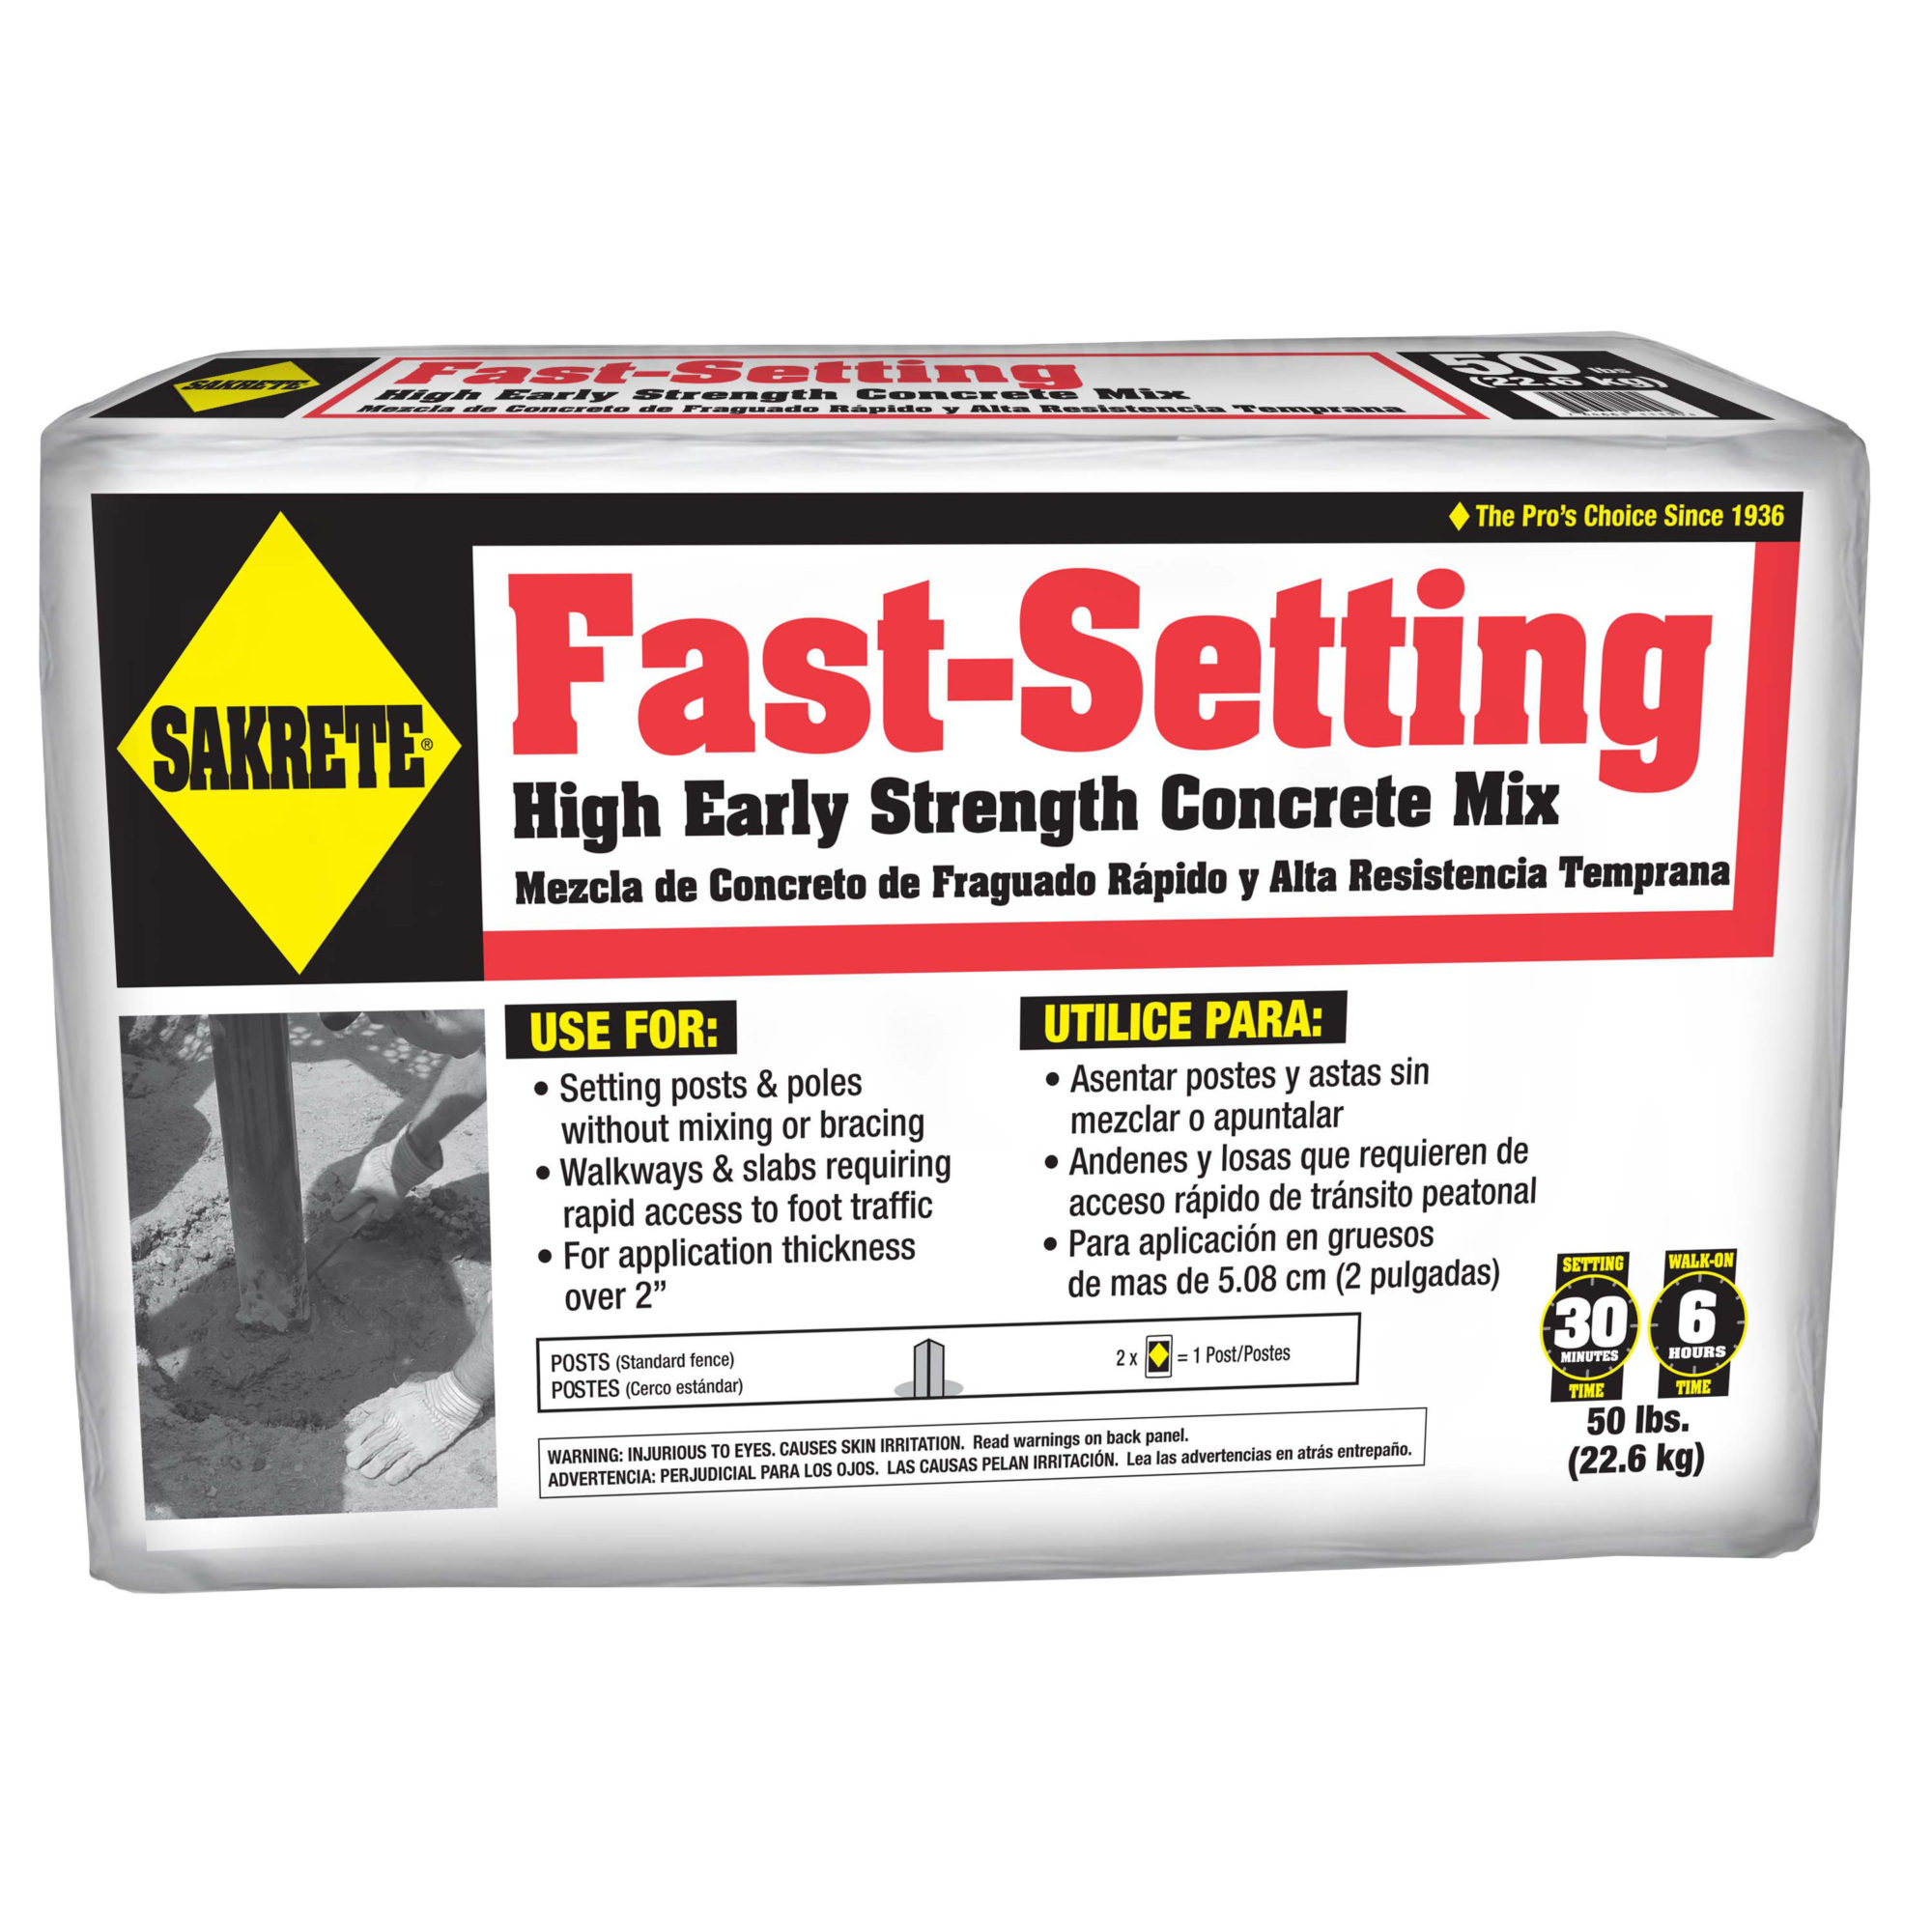 Fastset High Early Strength Concrete Mix